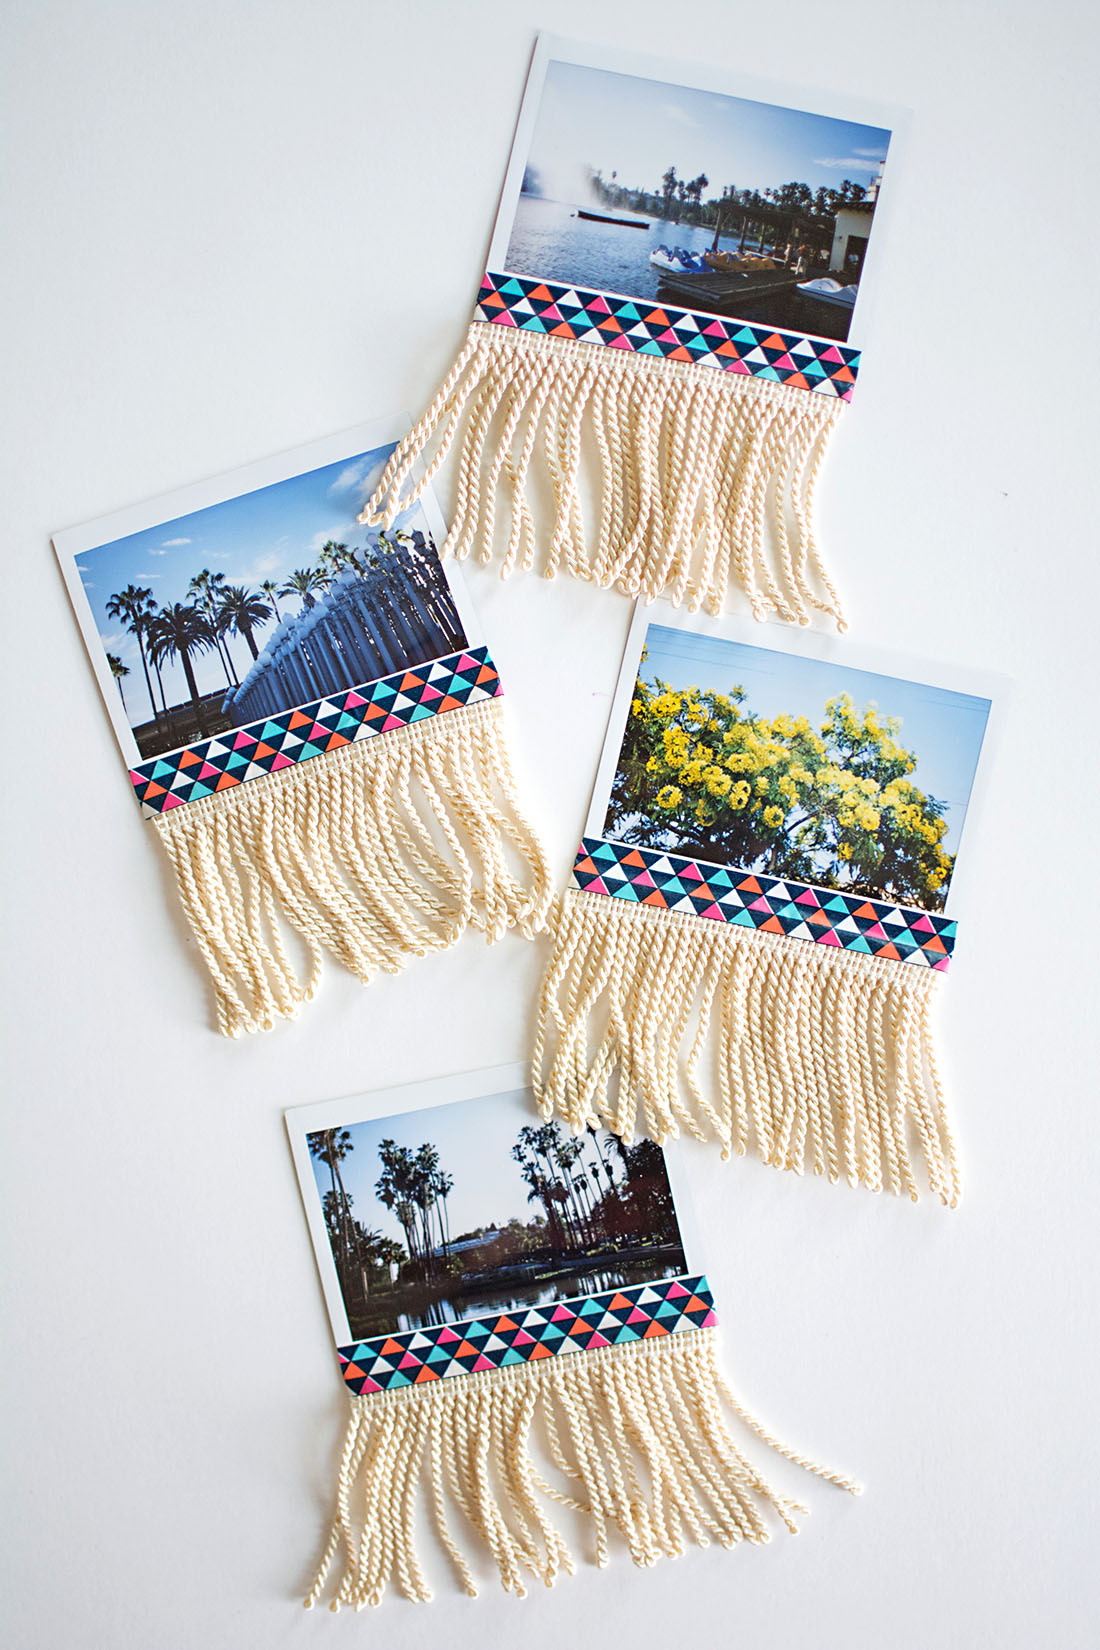 Add fringe to photos to make a decorative garland